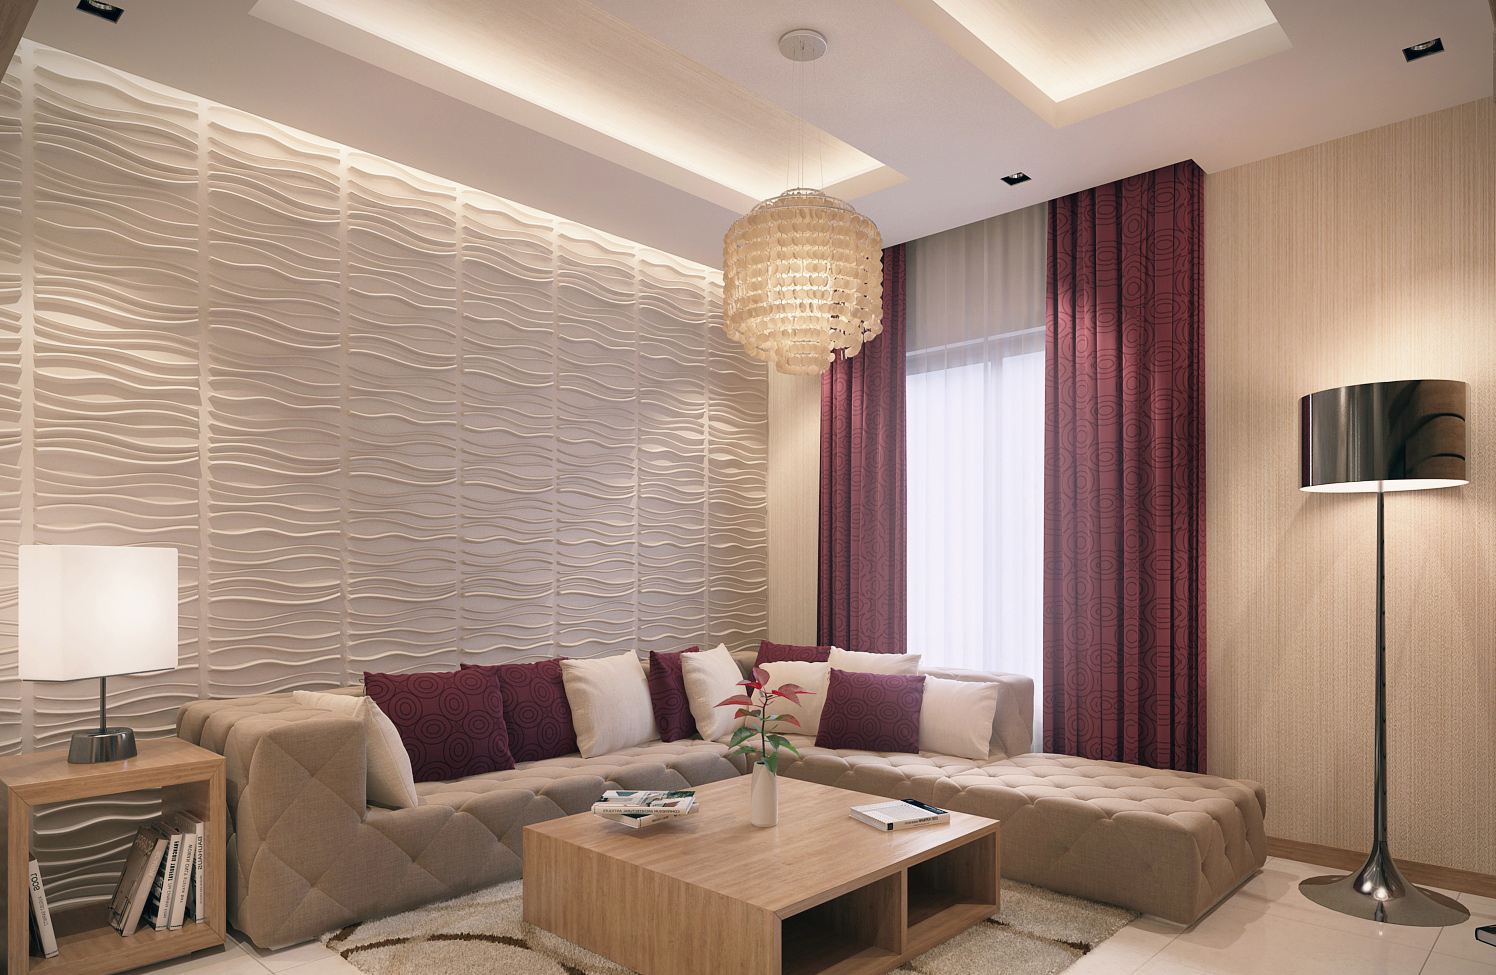 Living Room With Burgundy And Gold Curtains